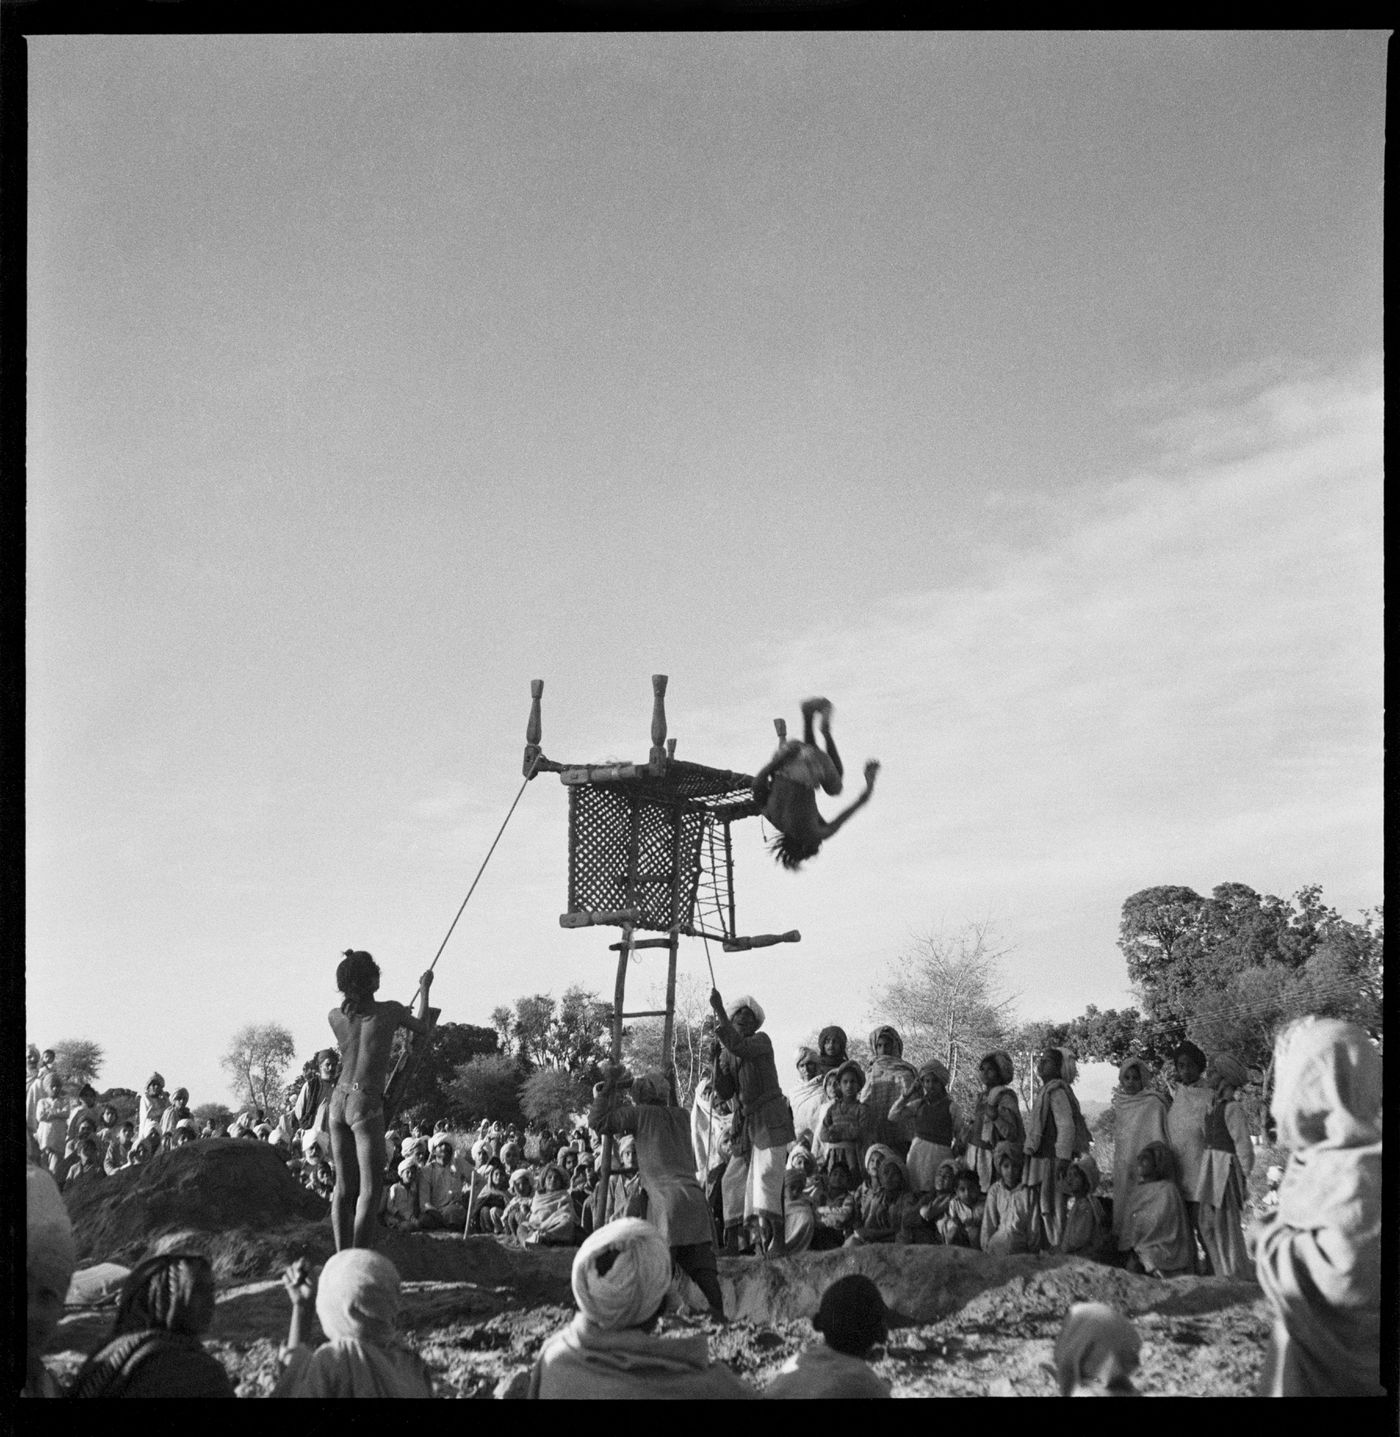 Crowd watching a diving competition in Chandigarh's area before the construction, India